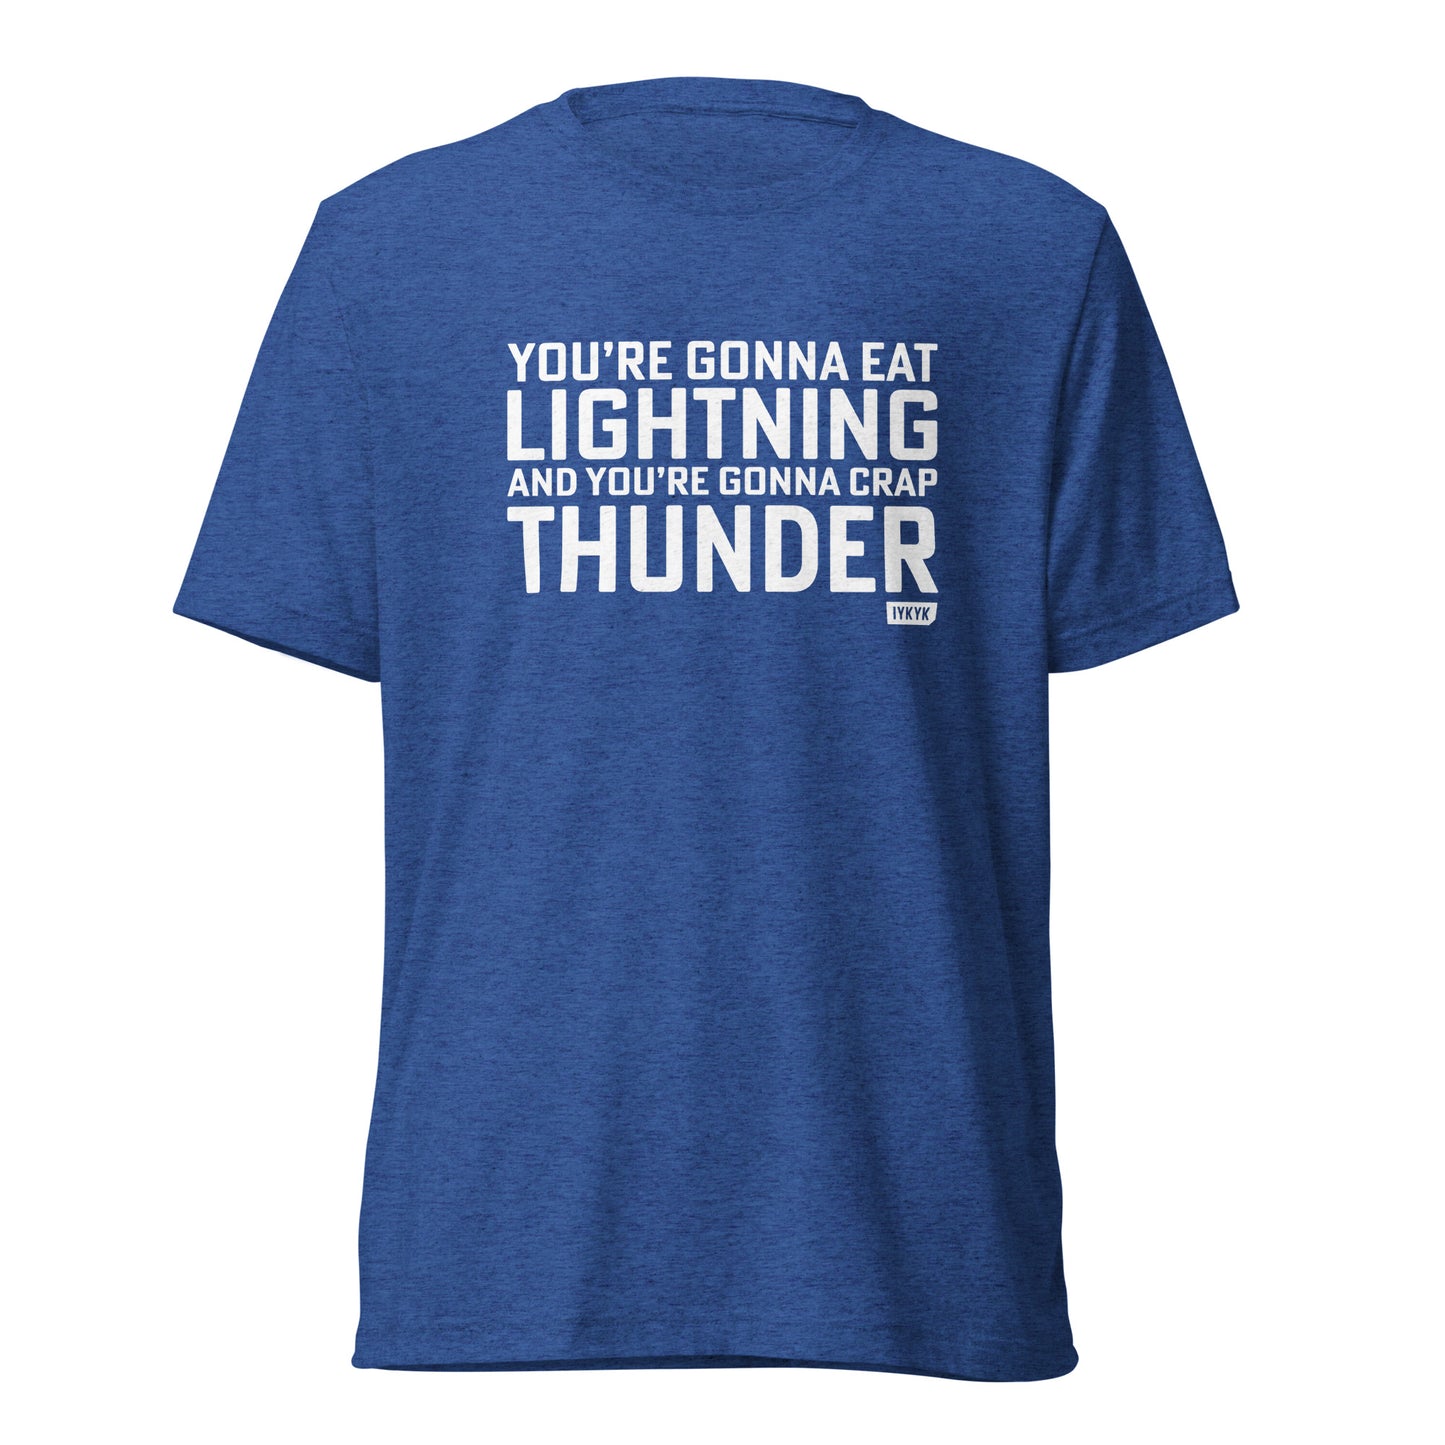 Premium Everyday You're Gonna Eat Lightning And You're Gonna Crap Thunder Rocky Tee